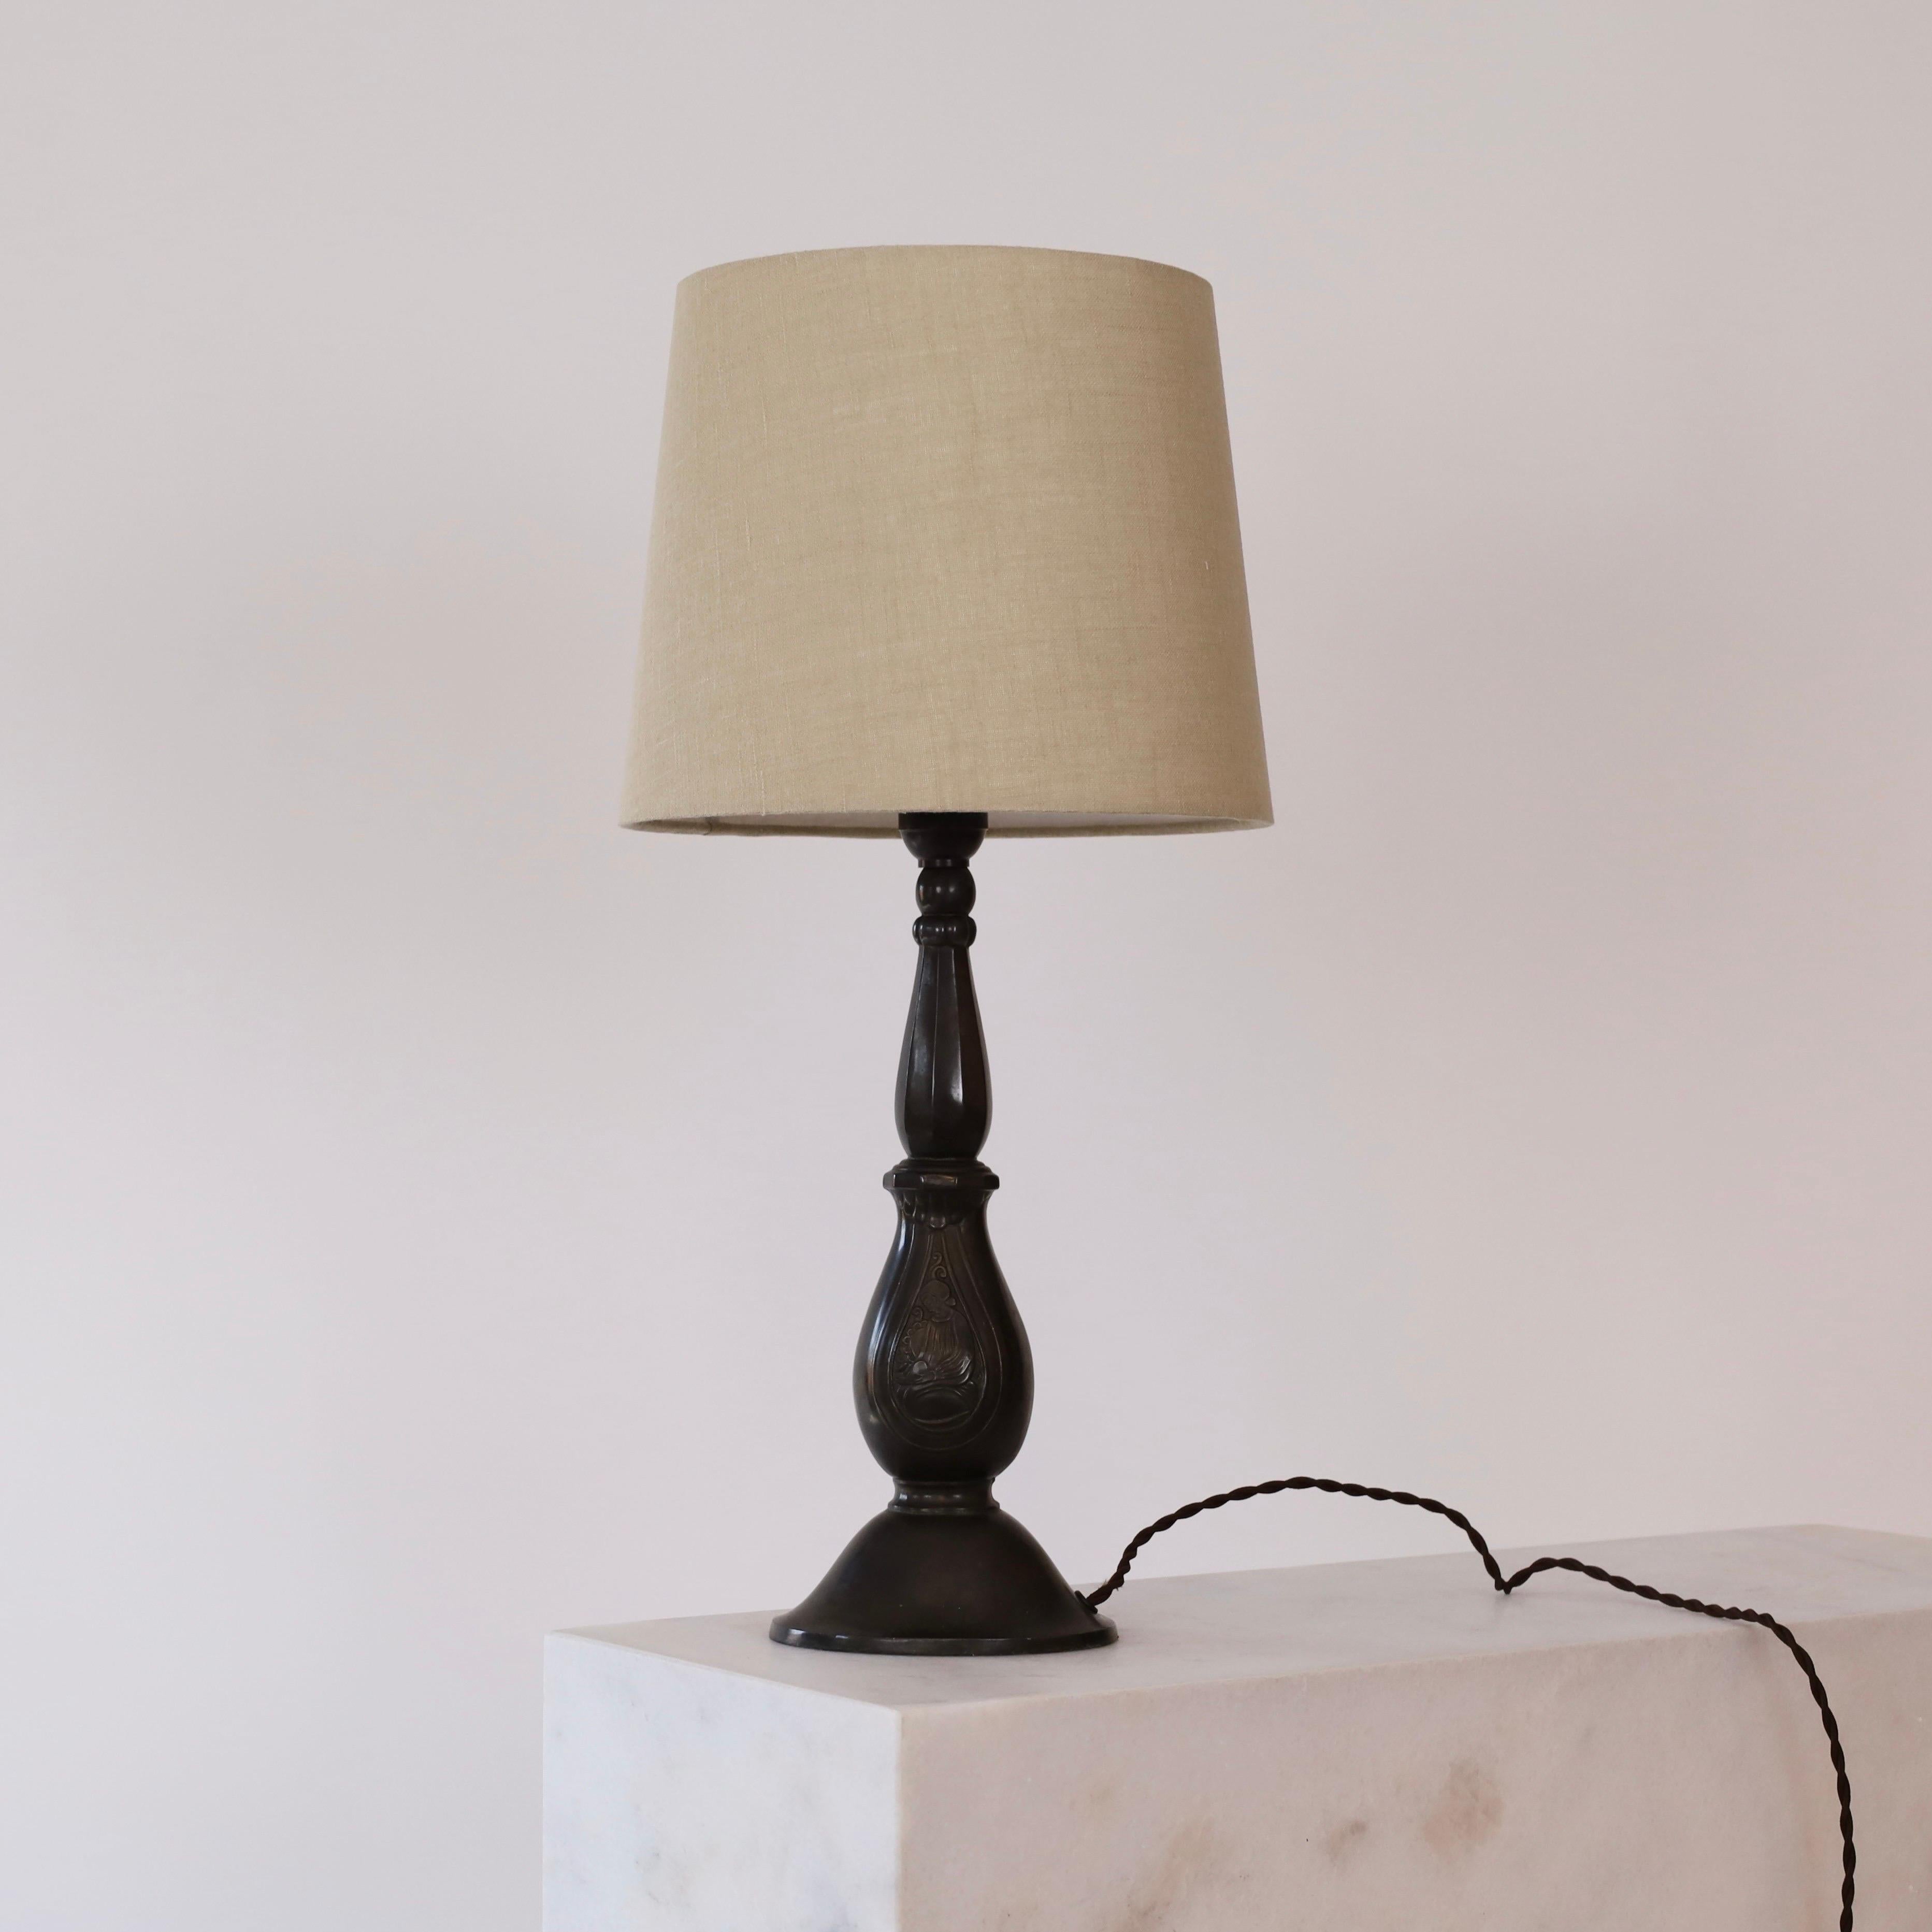 A table lamp by Just Andersen in great vintage condition. It is part of Just Andersens early work and true testament to his contribution to the Danish art deco movement in the 1920s. A piece for a beautiful home.

* Curvy metal table lamp with